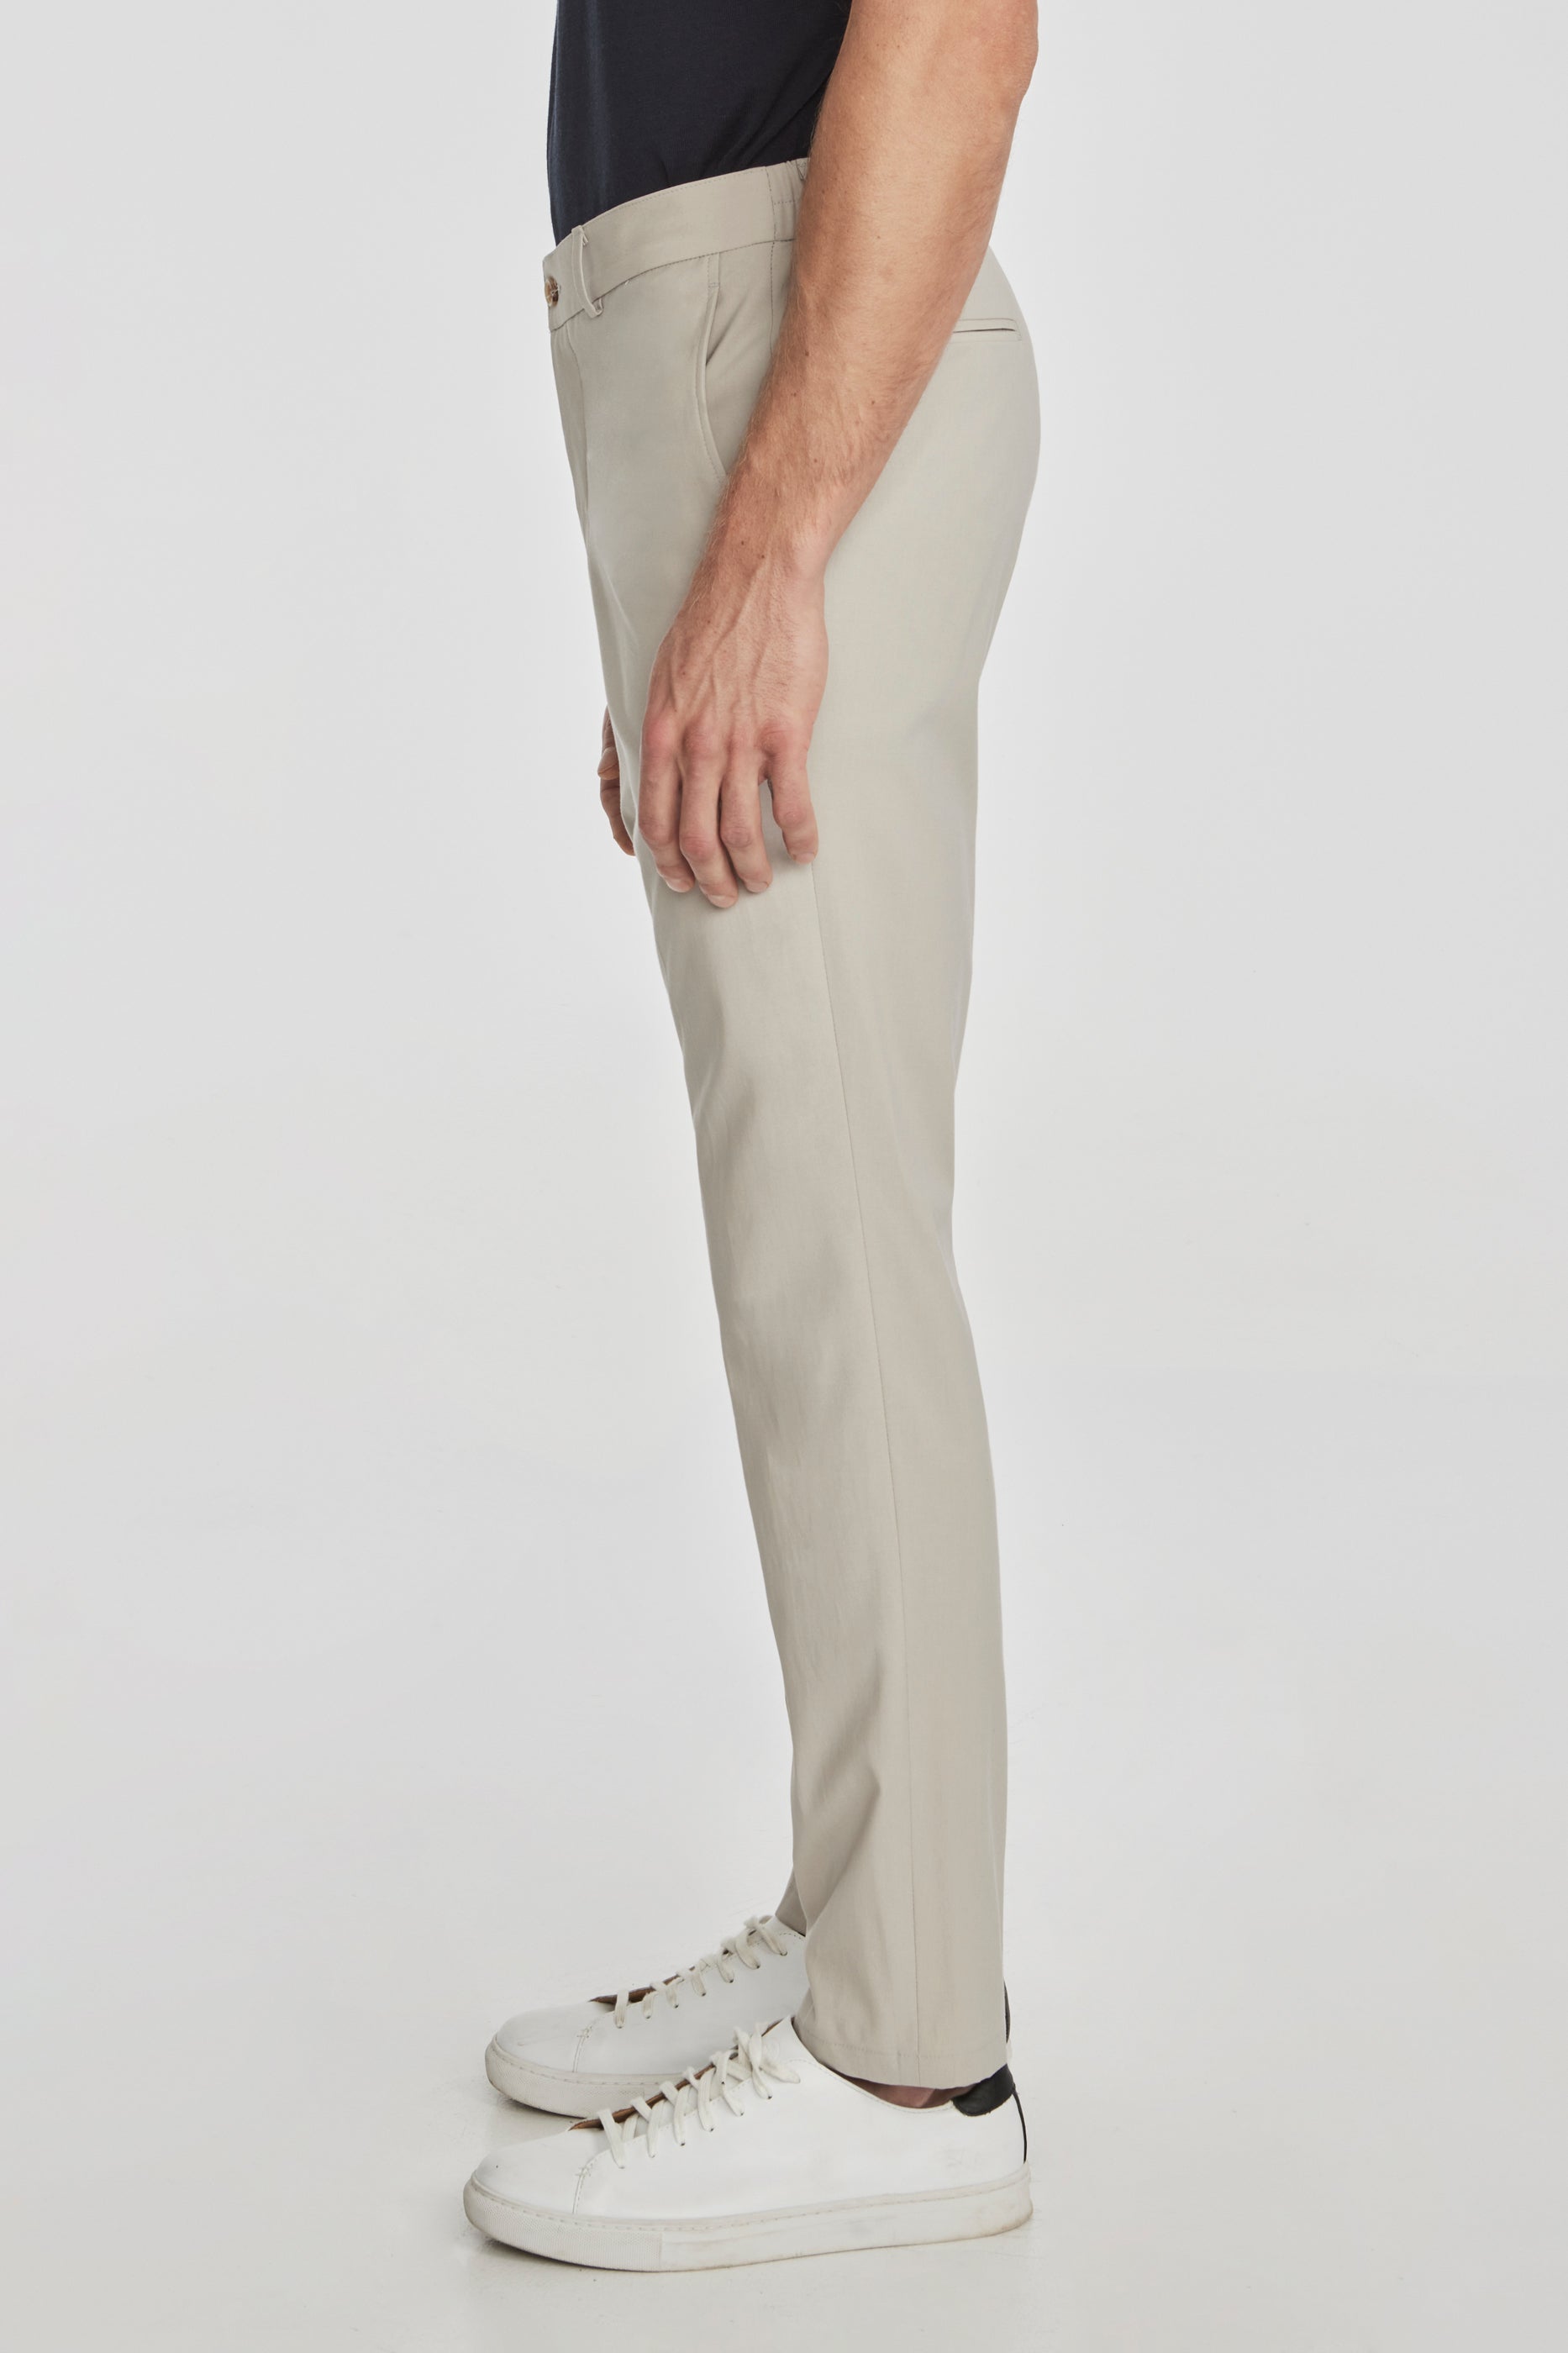 Alt view 3 Perth Wool and Cotton Stretch Pant in Tan